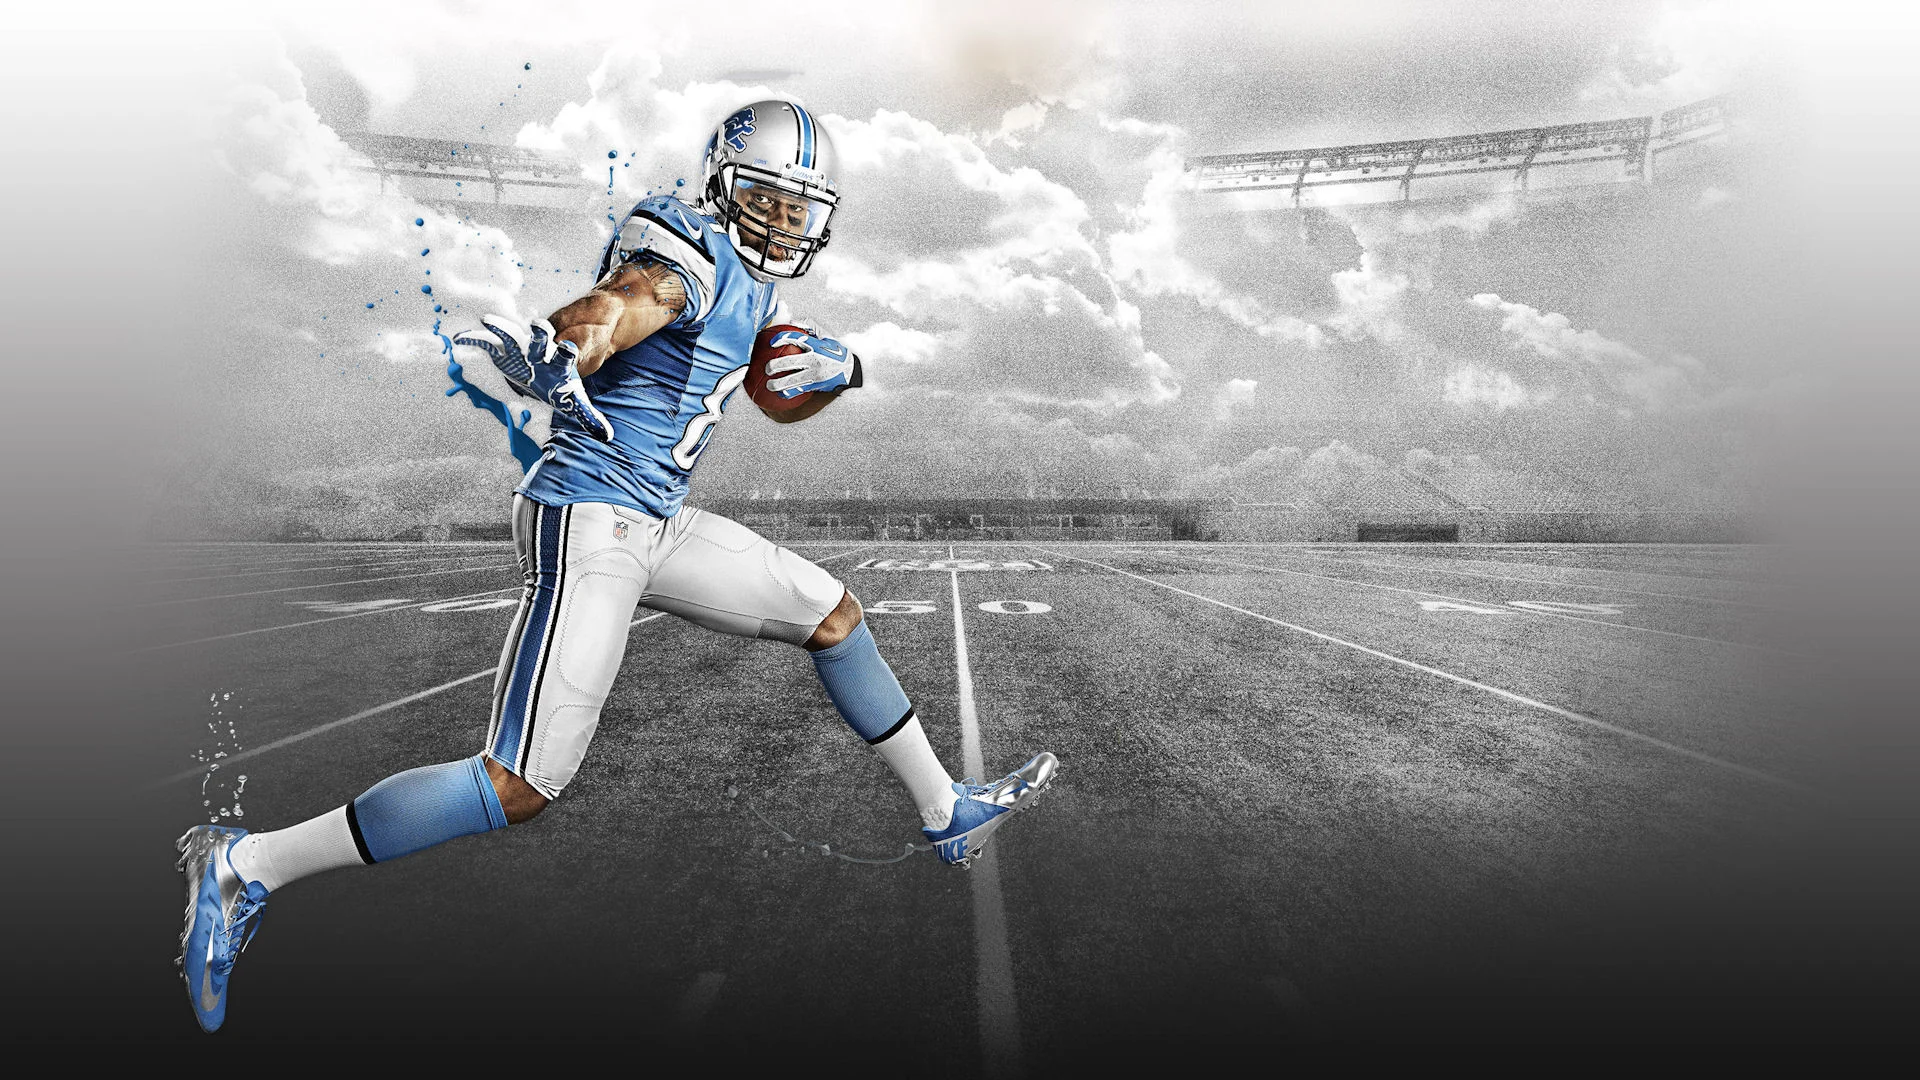 Cool NFL Players Wallpapers